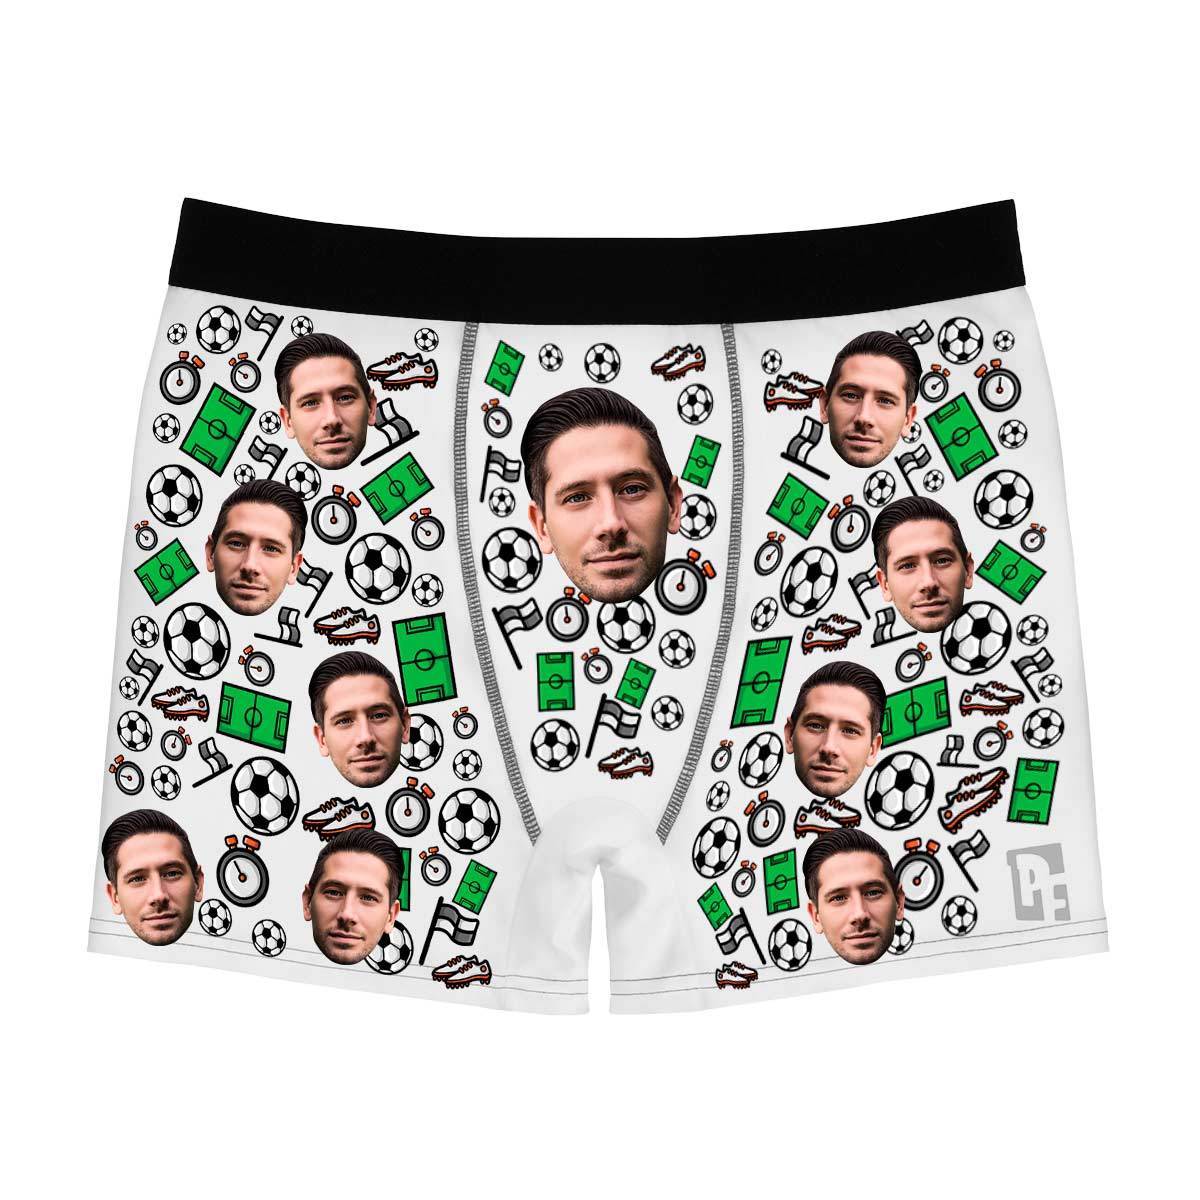 White Football men's boxer briefs personalized with photo printed on them